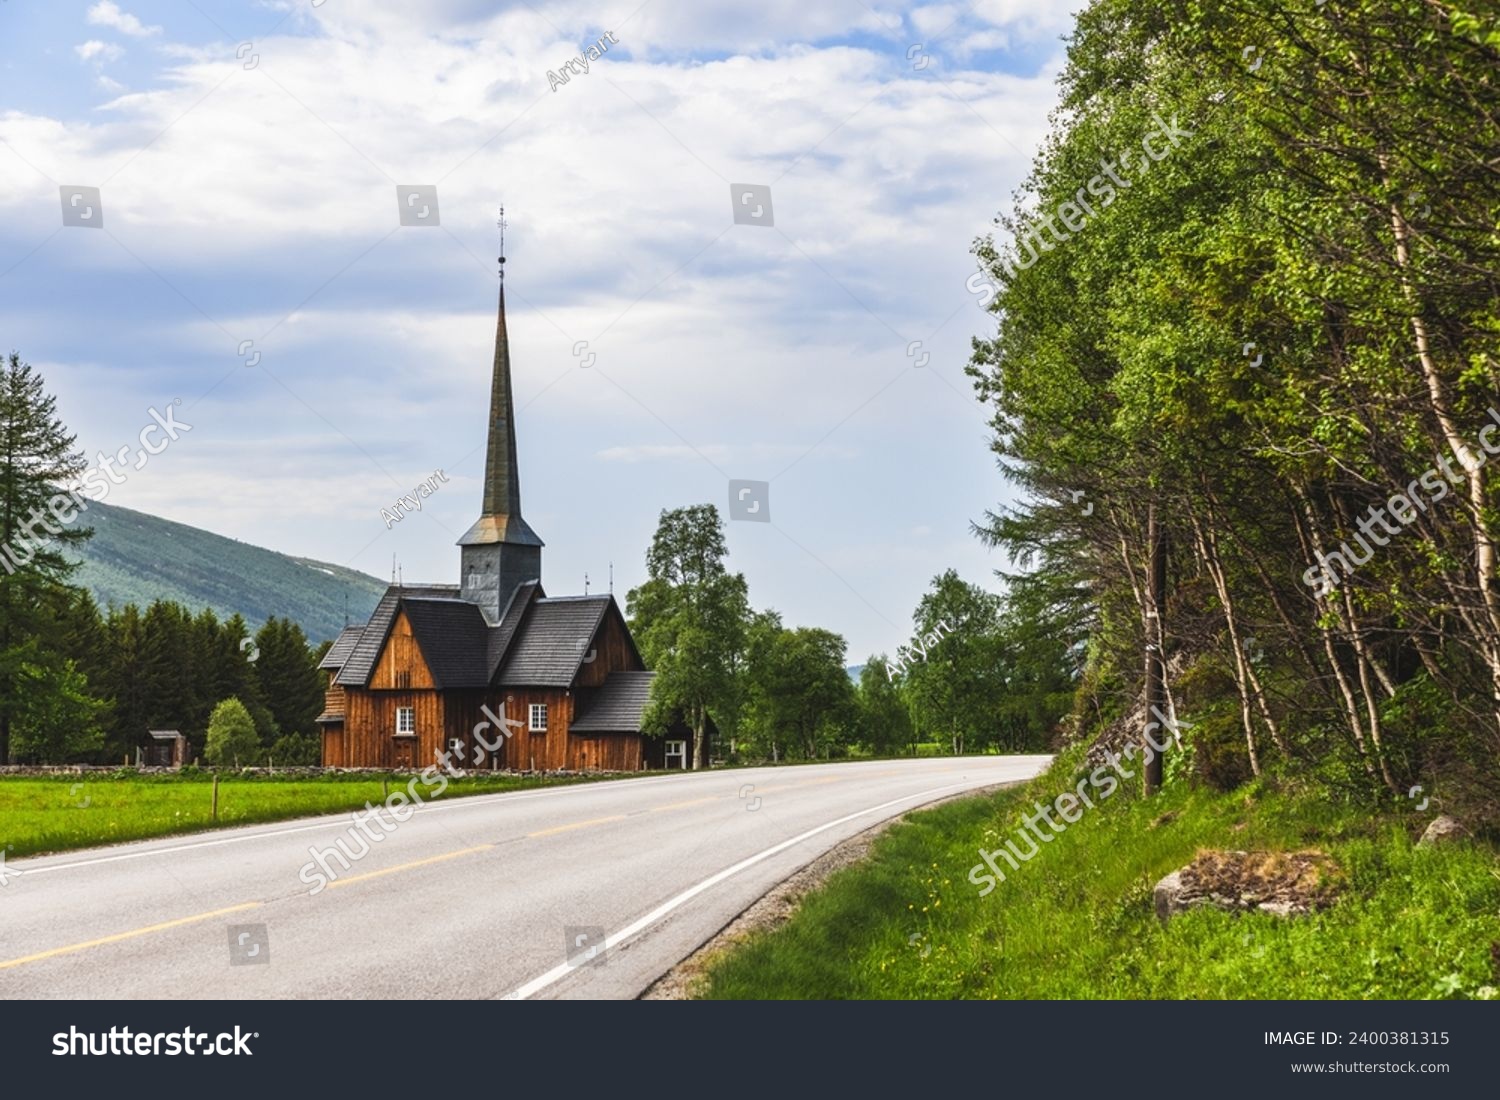 A scenic road winds towards the ancient Kvikne kirke in Innlandet, Norway, a wooden church with a tall spire, gracefully encircled by green trees, depicting a serene and historic tableau #2400381315